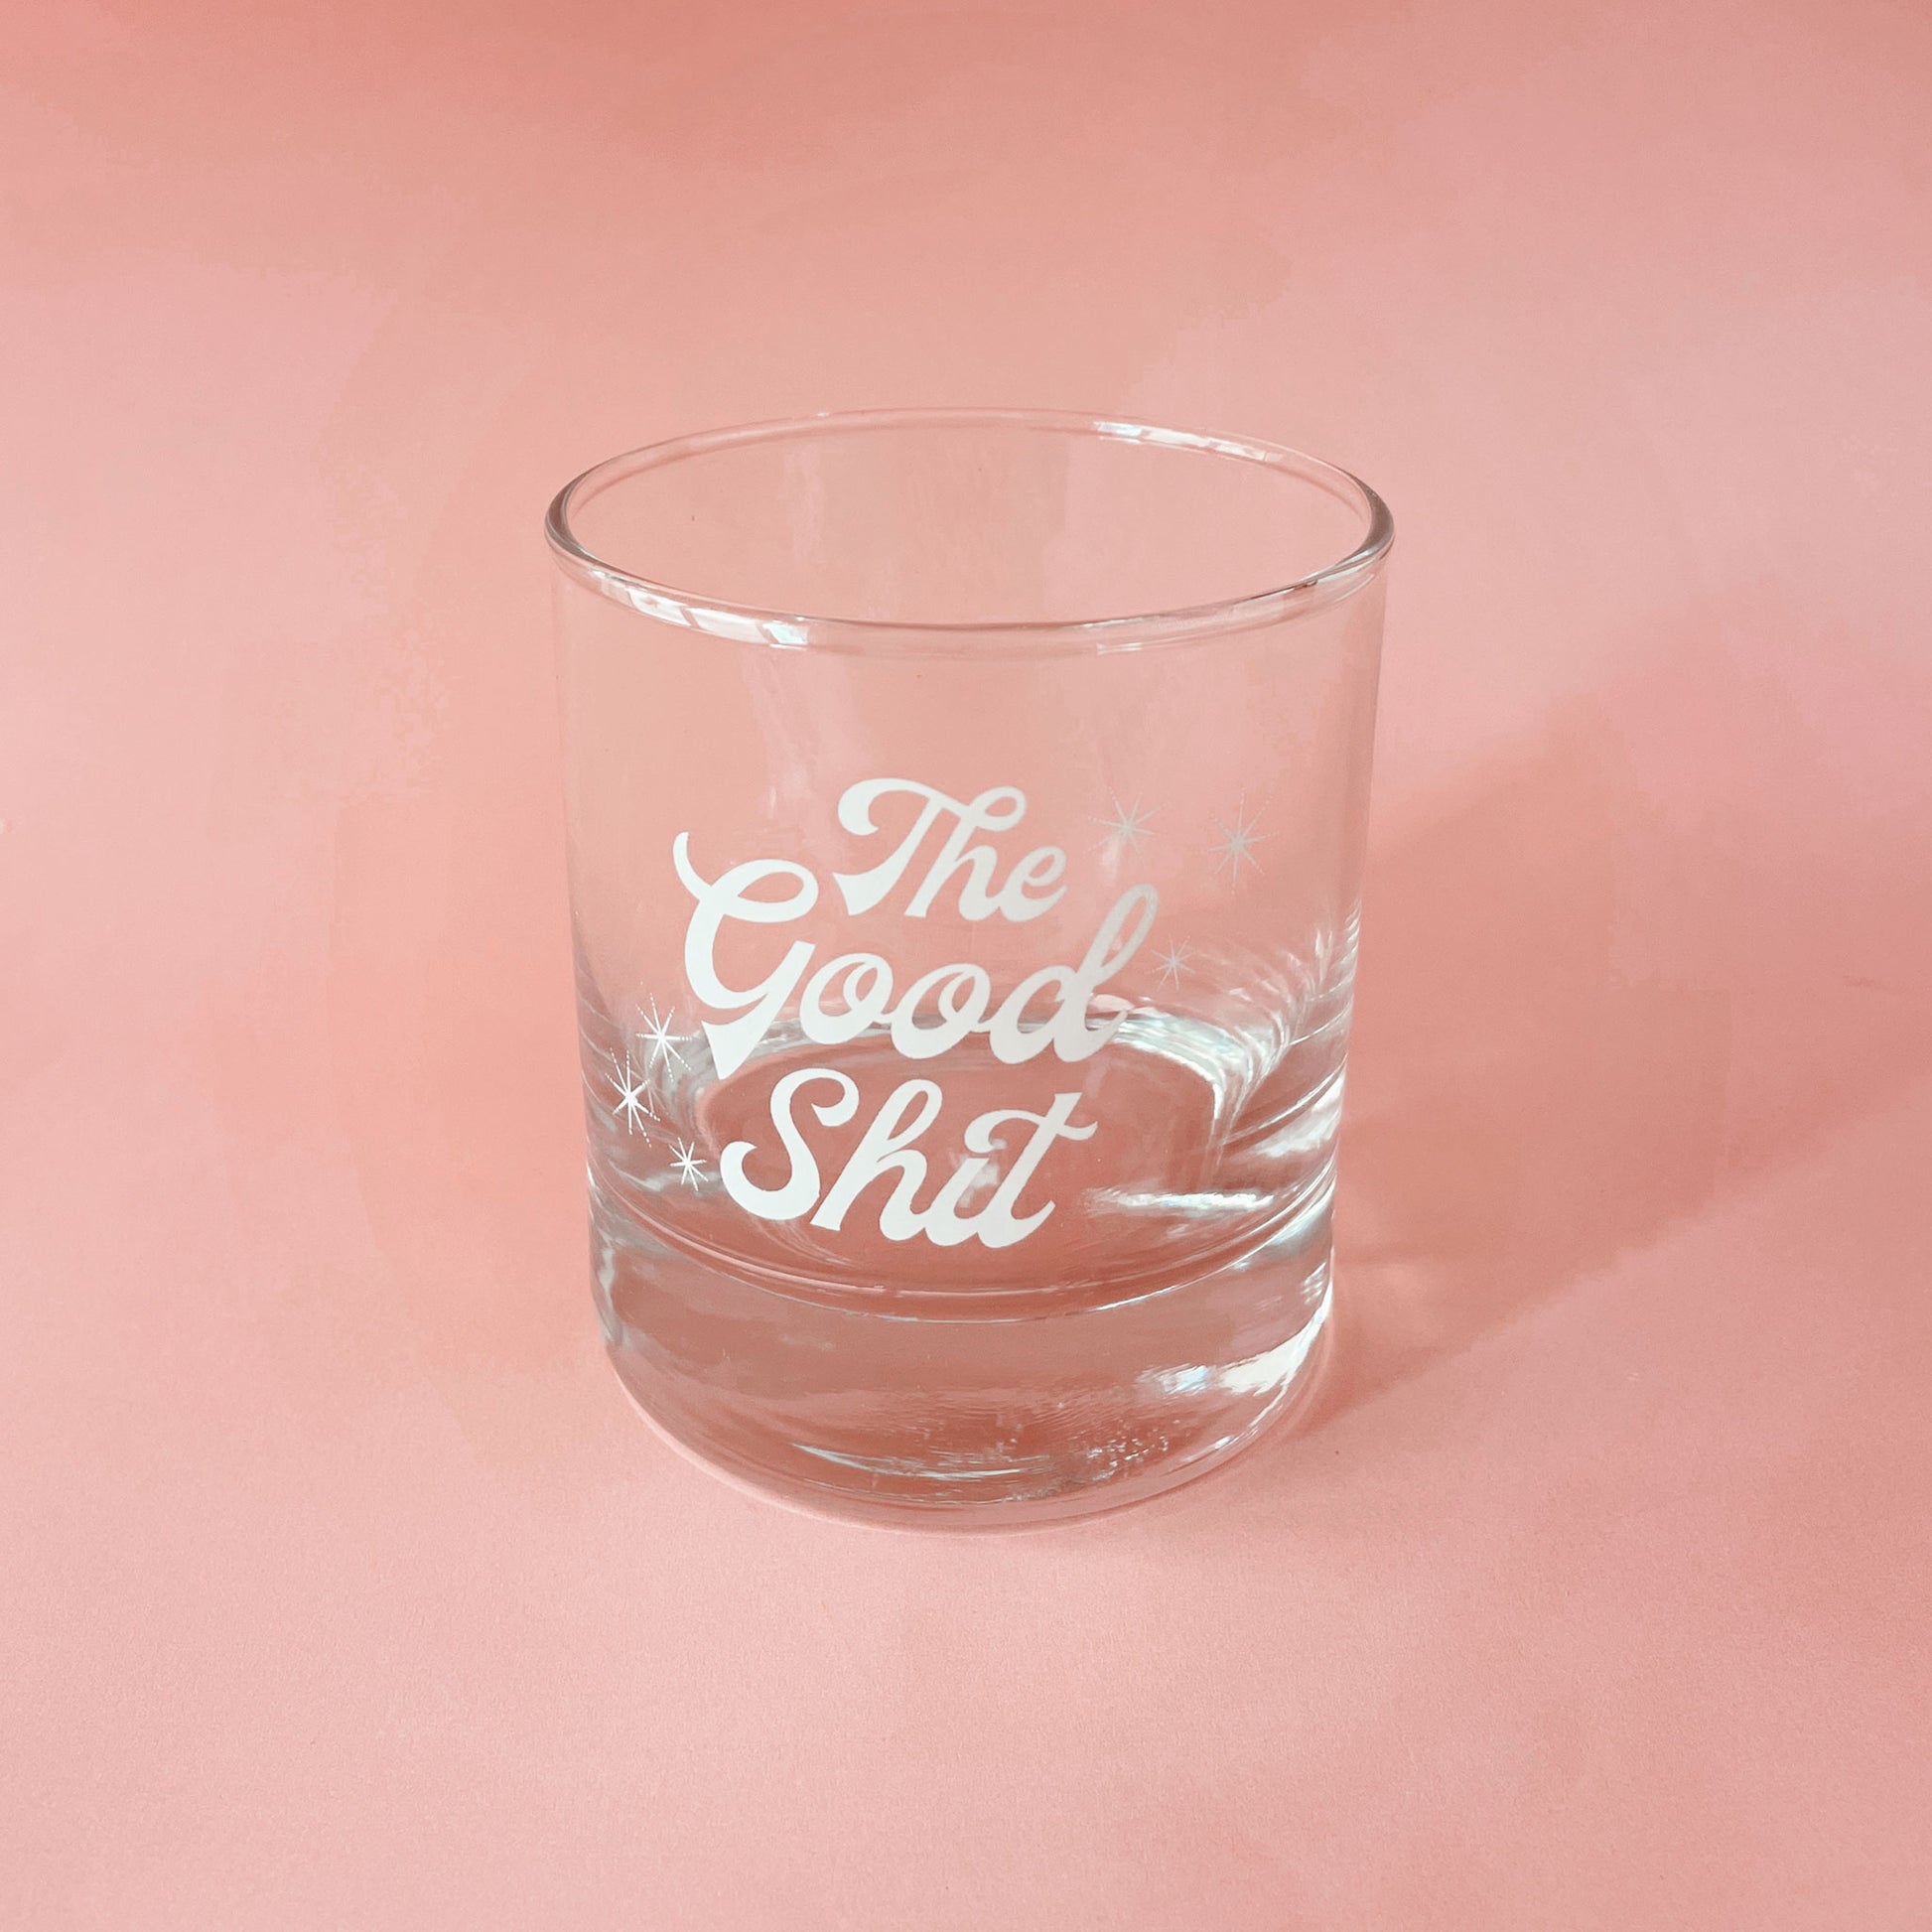 Against a peachy pink background is a photograph of a short glass tumbler with a thick bottom and "The Good Shit" printed across the center in white groovy cursive text.